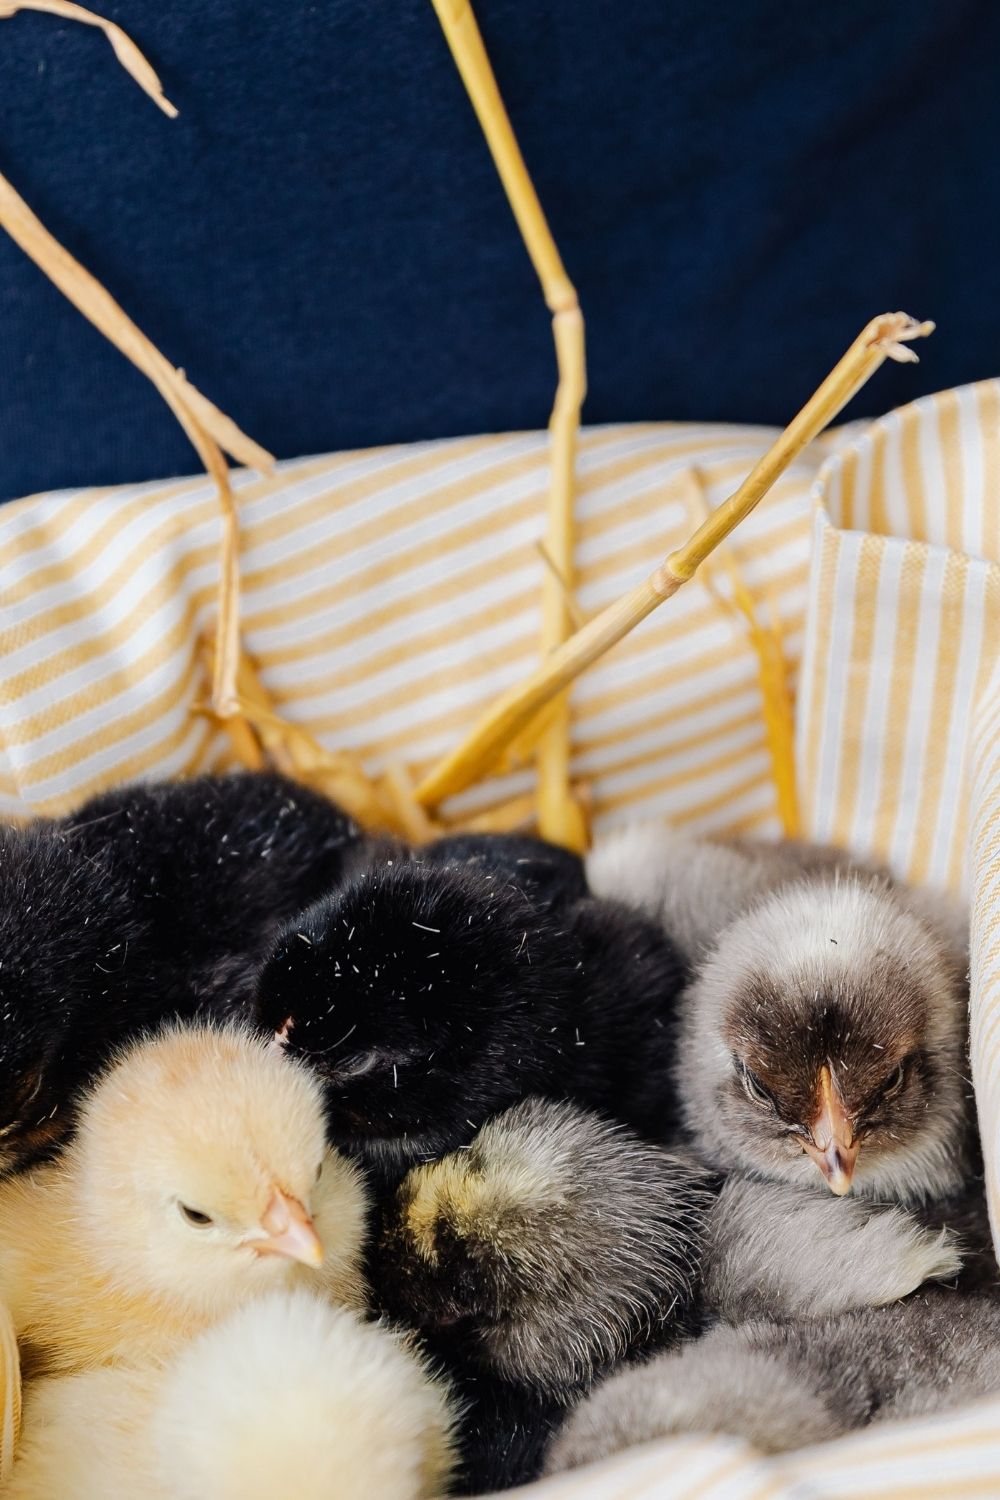 Baby Chicks or Hatching Eggs